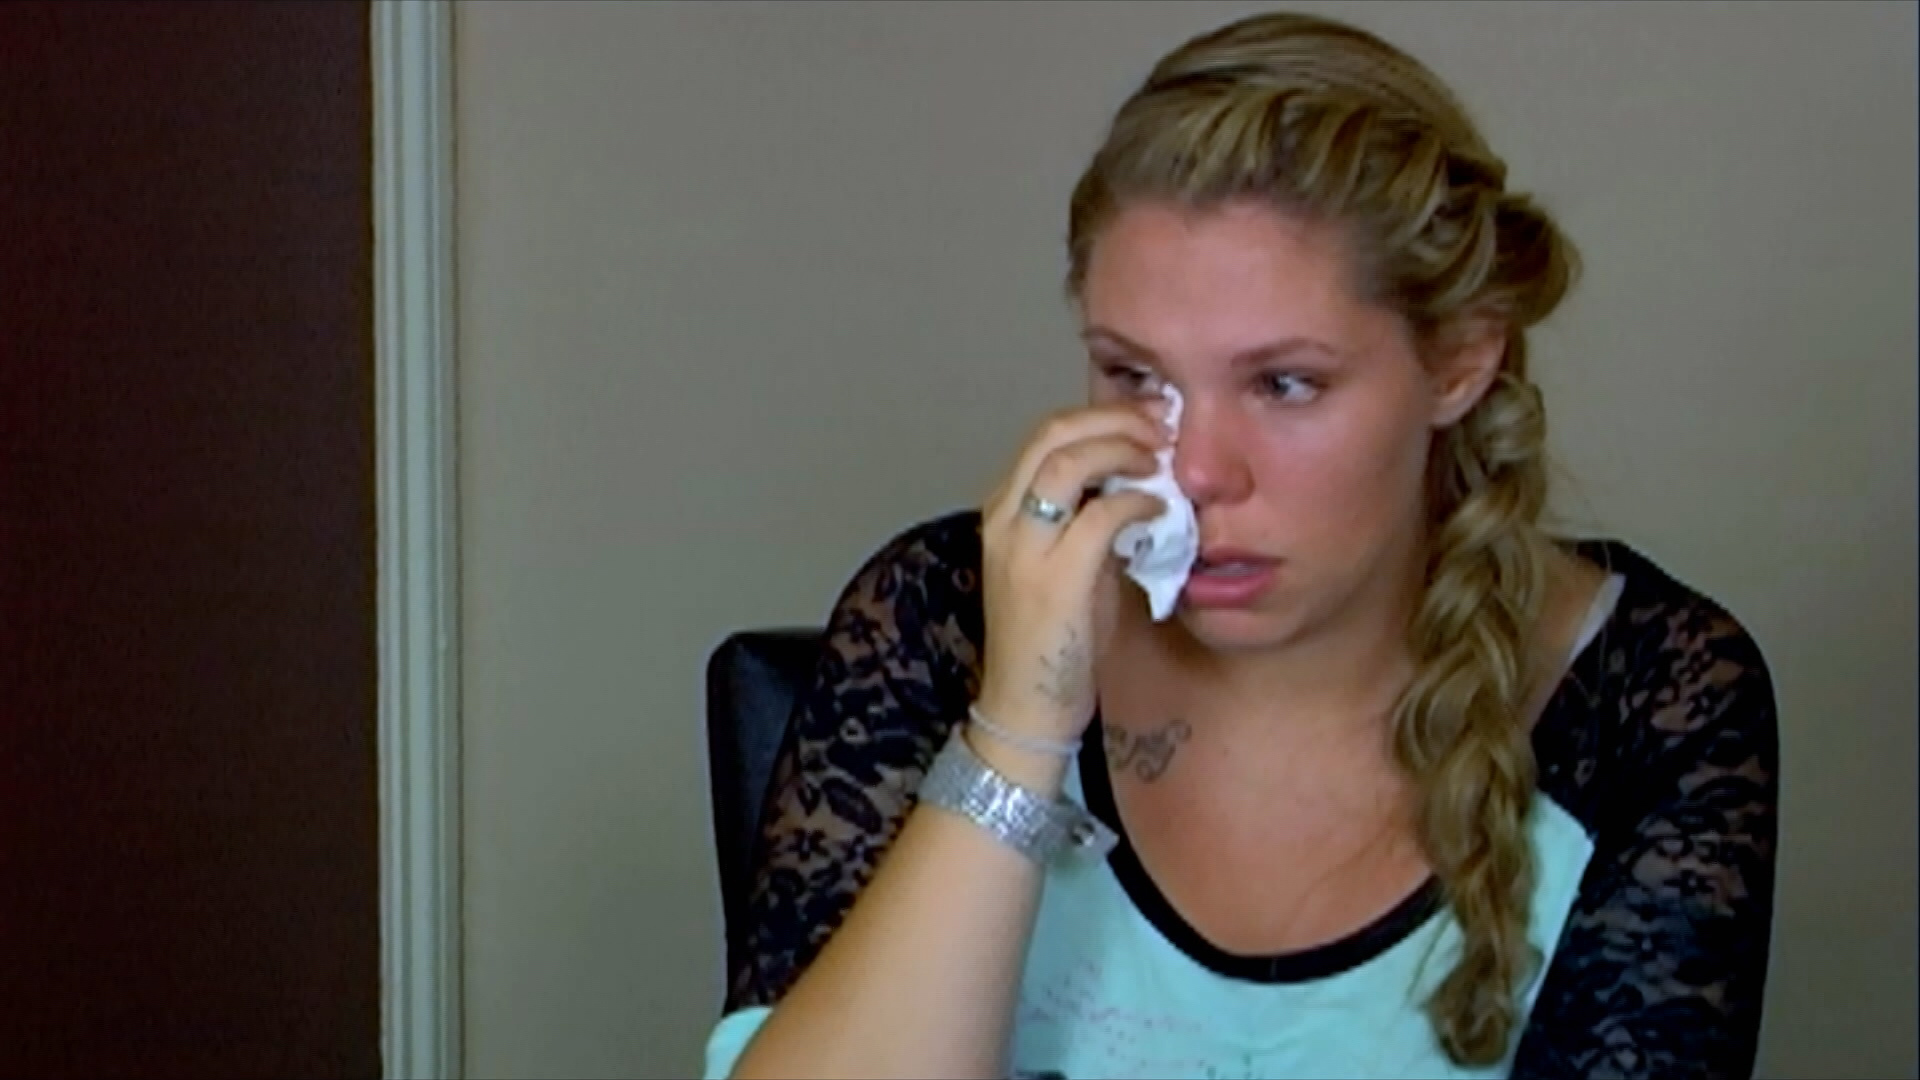 Watch Teen Mom 2 Season 5 Episode 7 These Are The Days Full Show On Paramount Plus